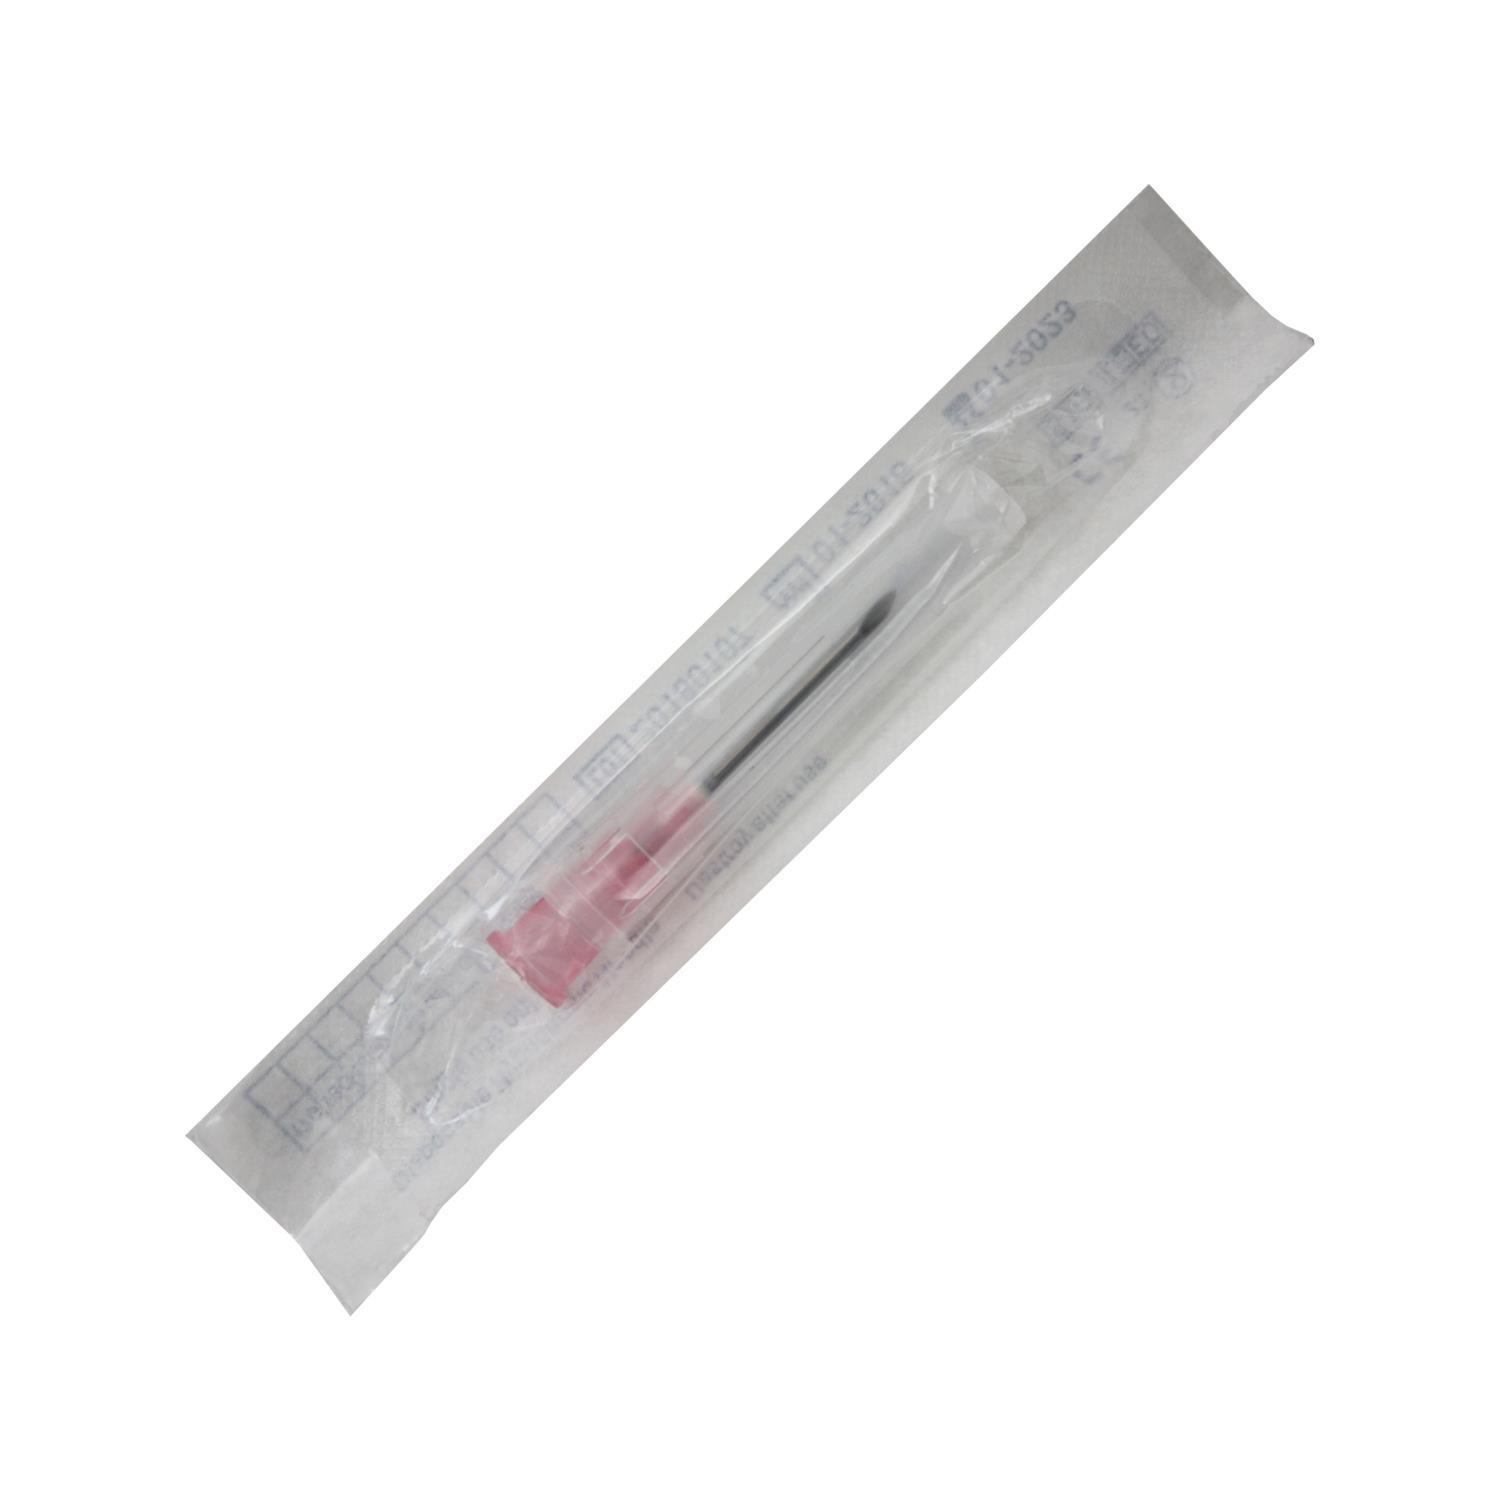 Buy Disposable Plastic Luer Lock Needle 18G x 3/4in from Fane